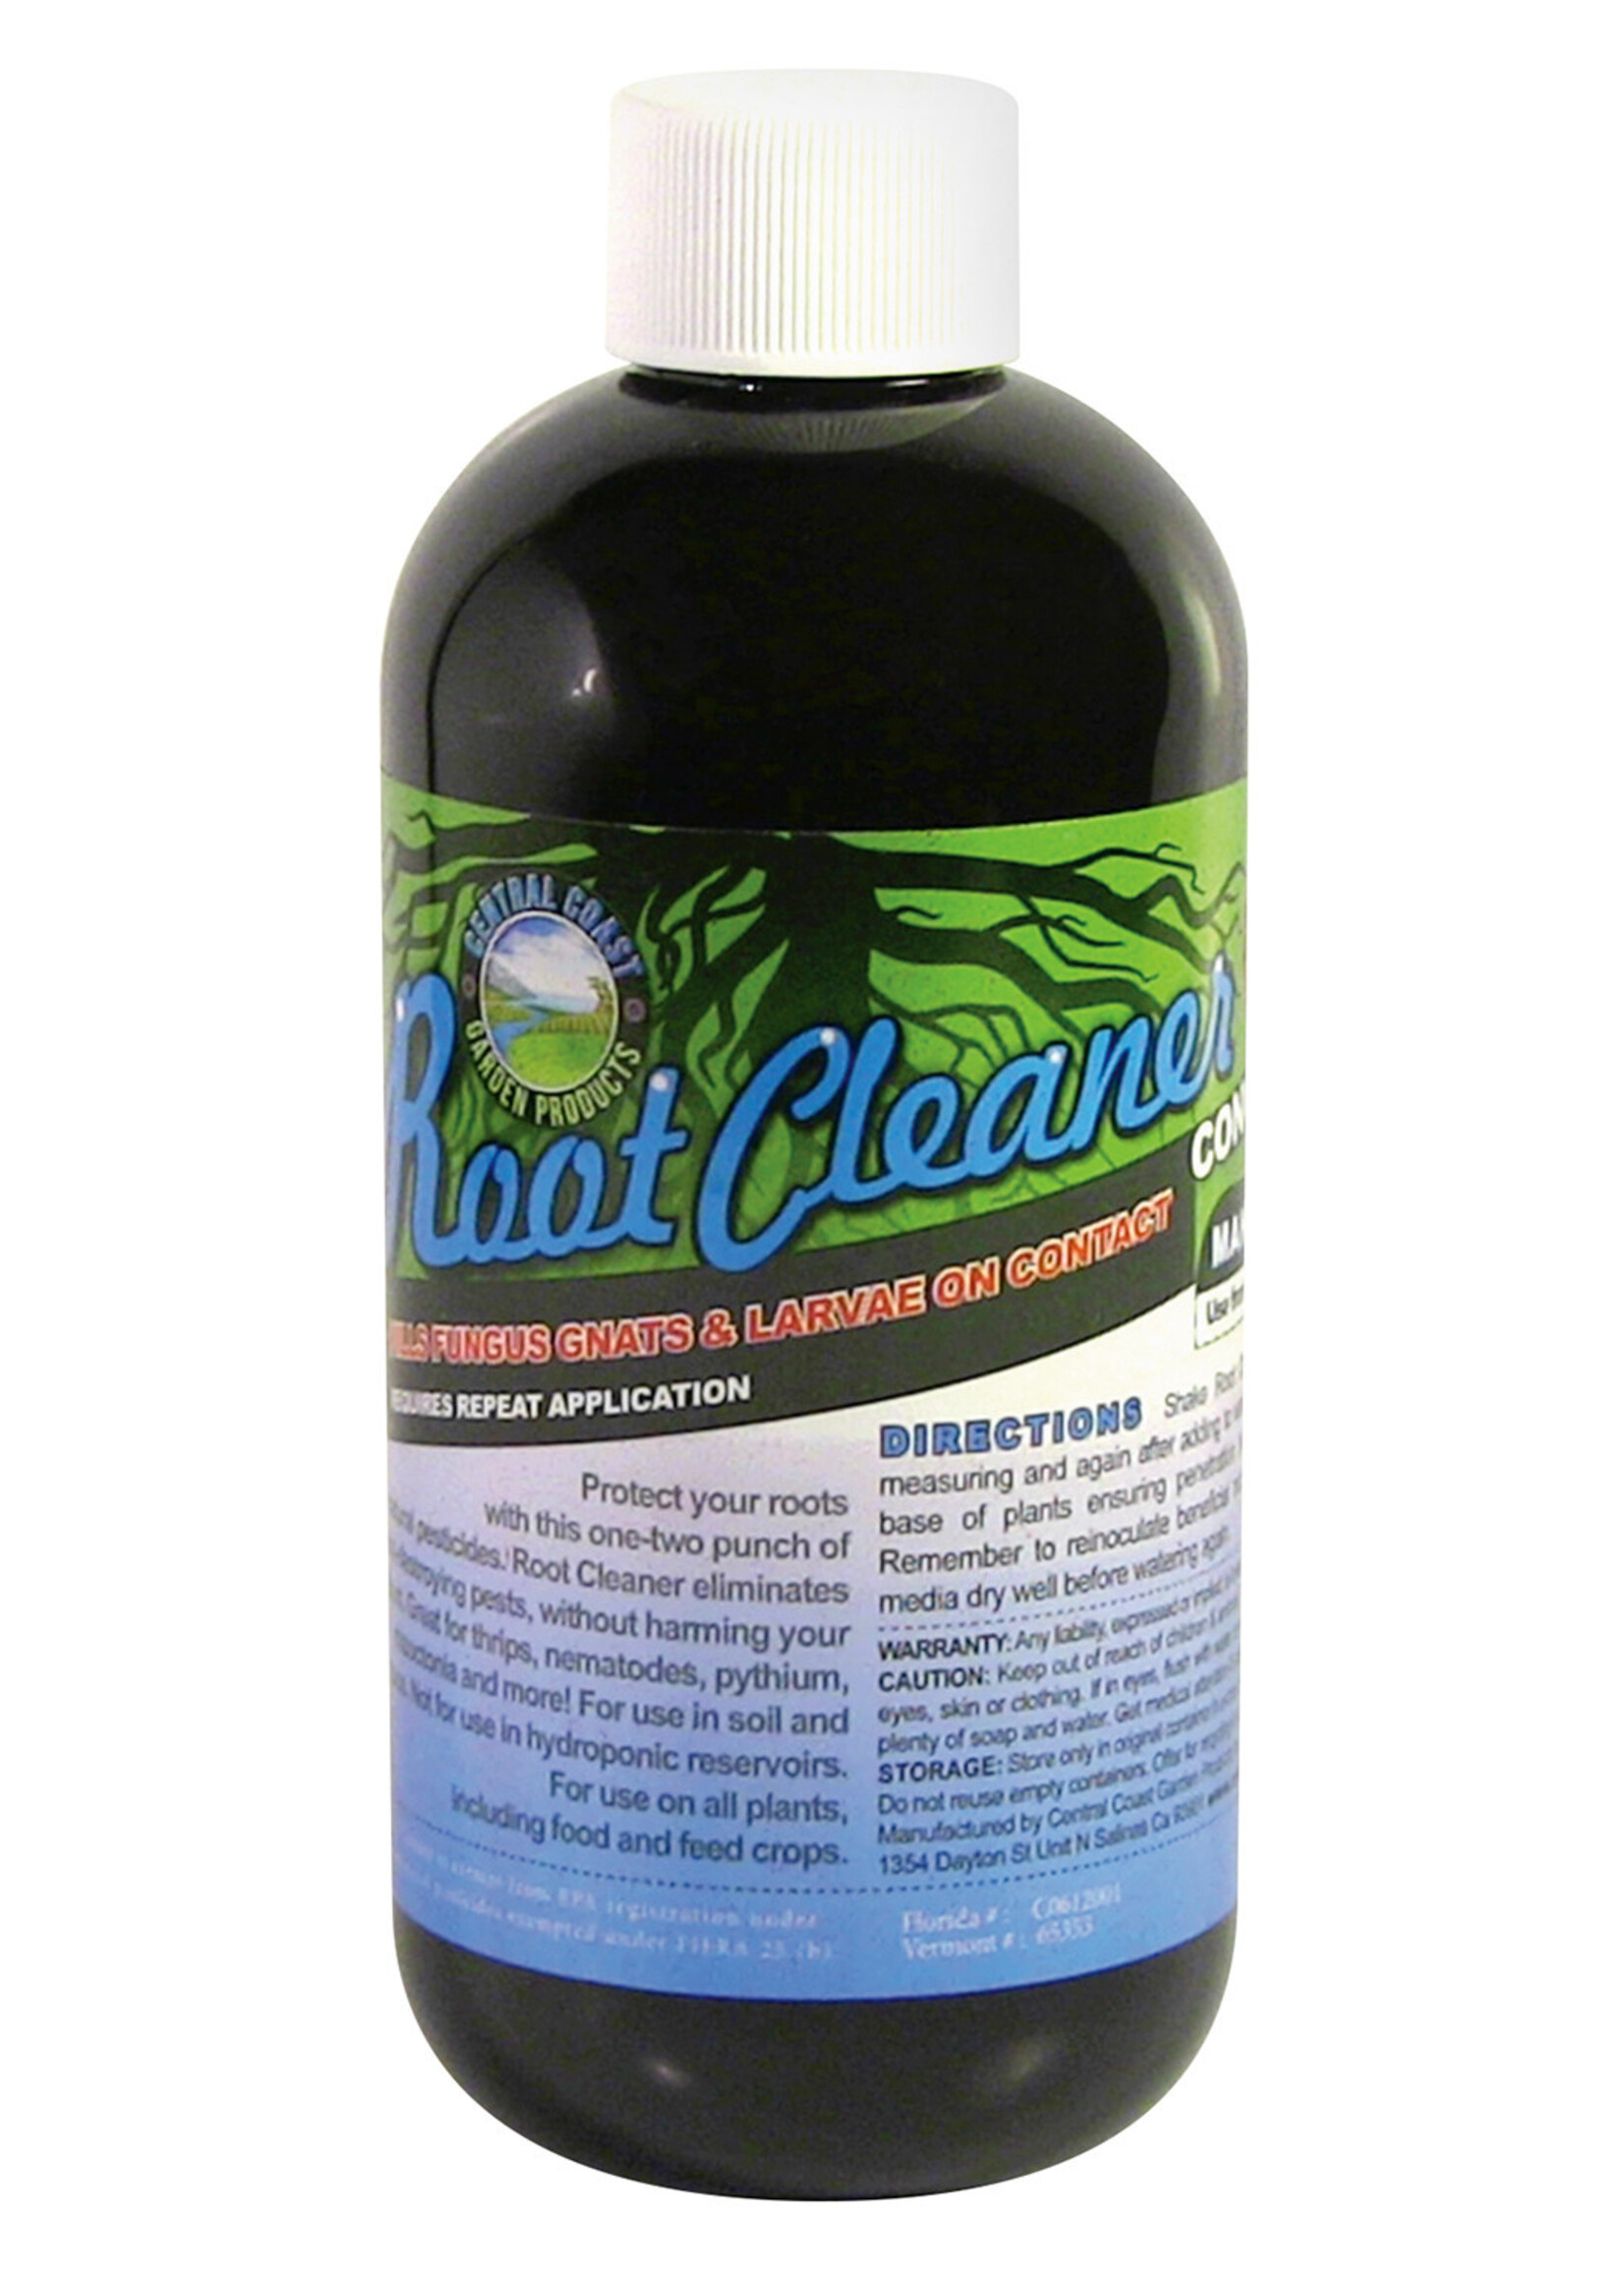 Central Coast Garden Products Root Cleaner 8 oz - Makes 16 Gallons